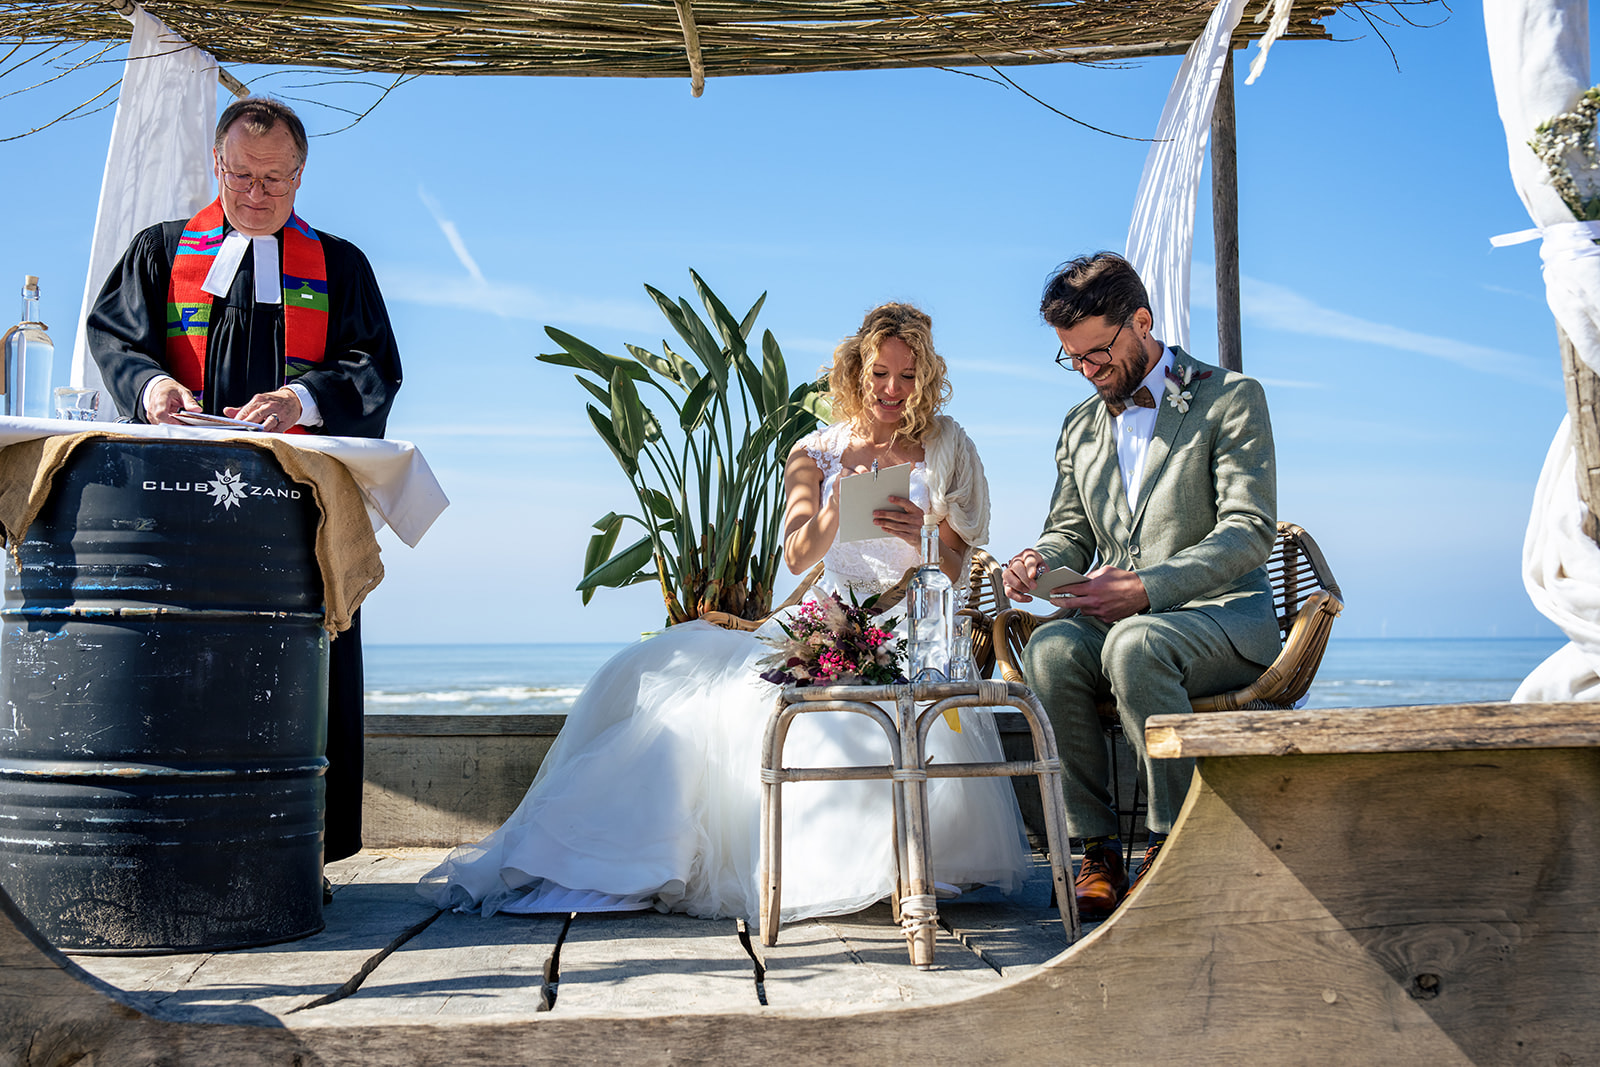 A couple who eloped in Castricum aan Zee on the Beach singing a song together with their celebrant